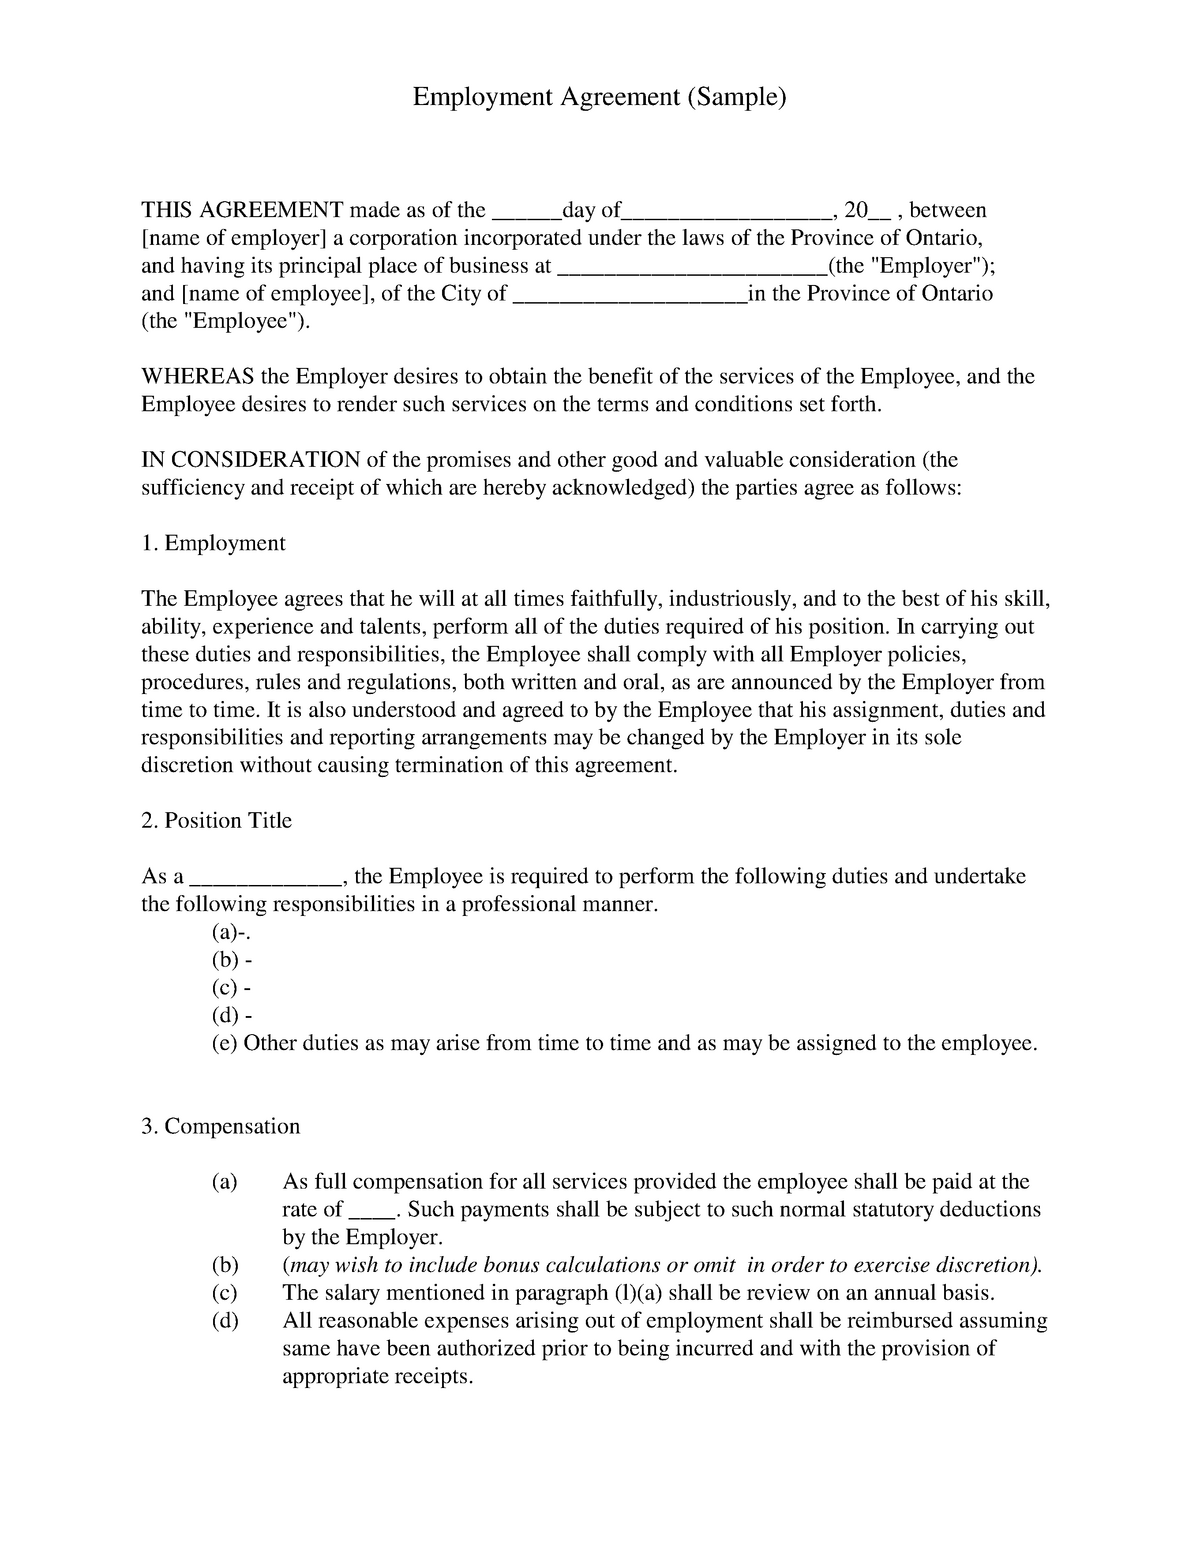 Sample Employment Contract - Employment Agreement (Sample) THIS ...